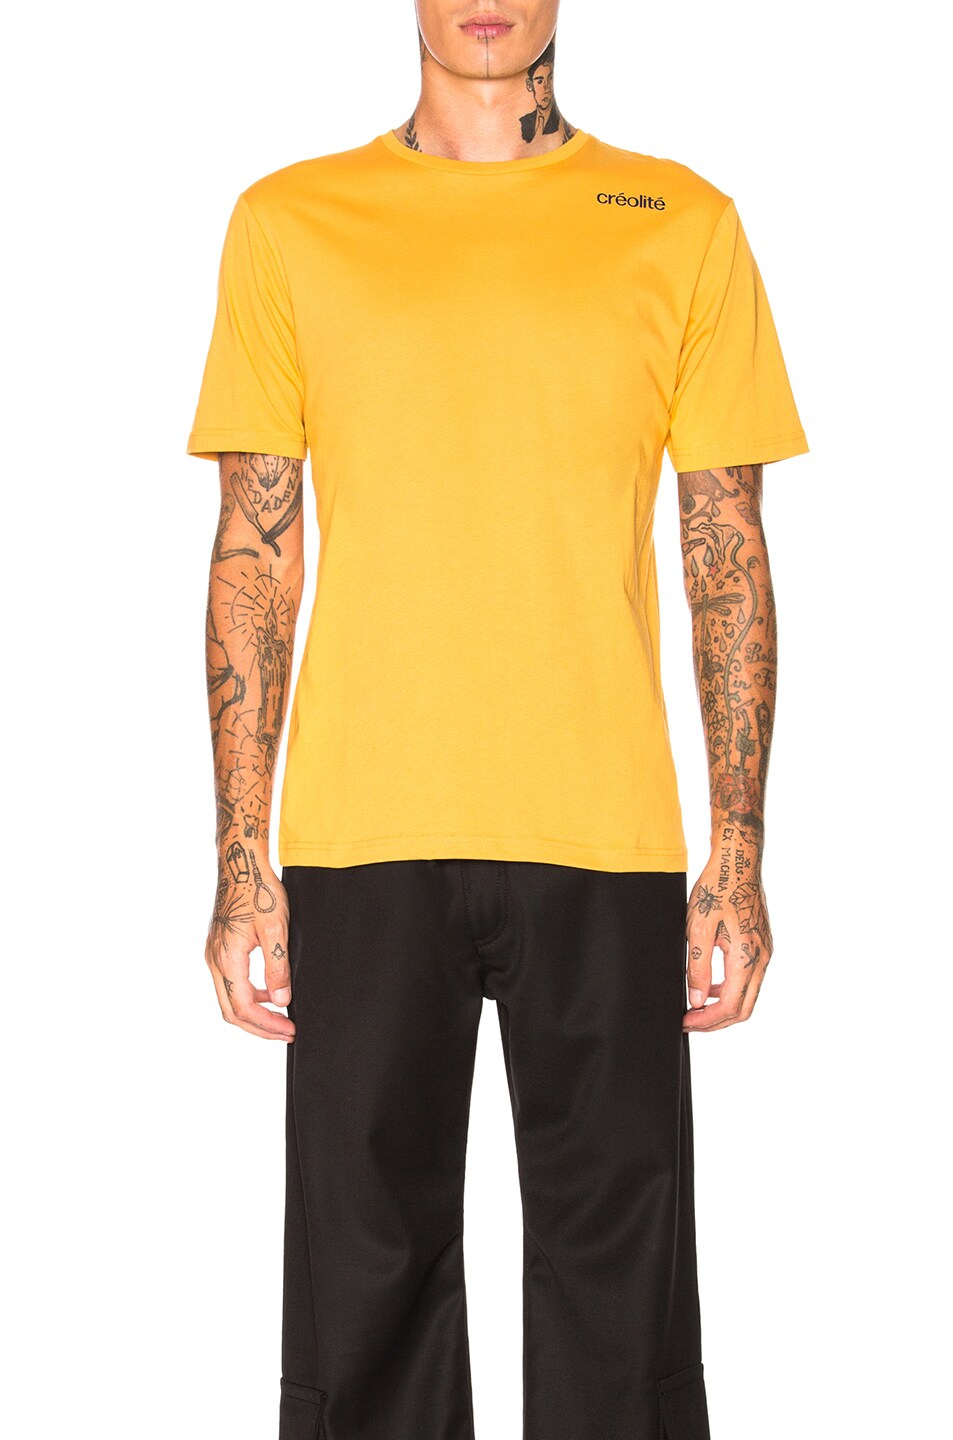 Image 1 of Wales Bonner Creolite Text Tee in Mustard